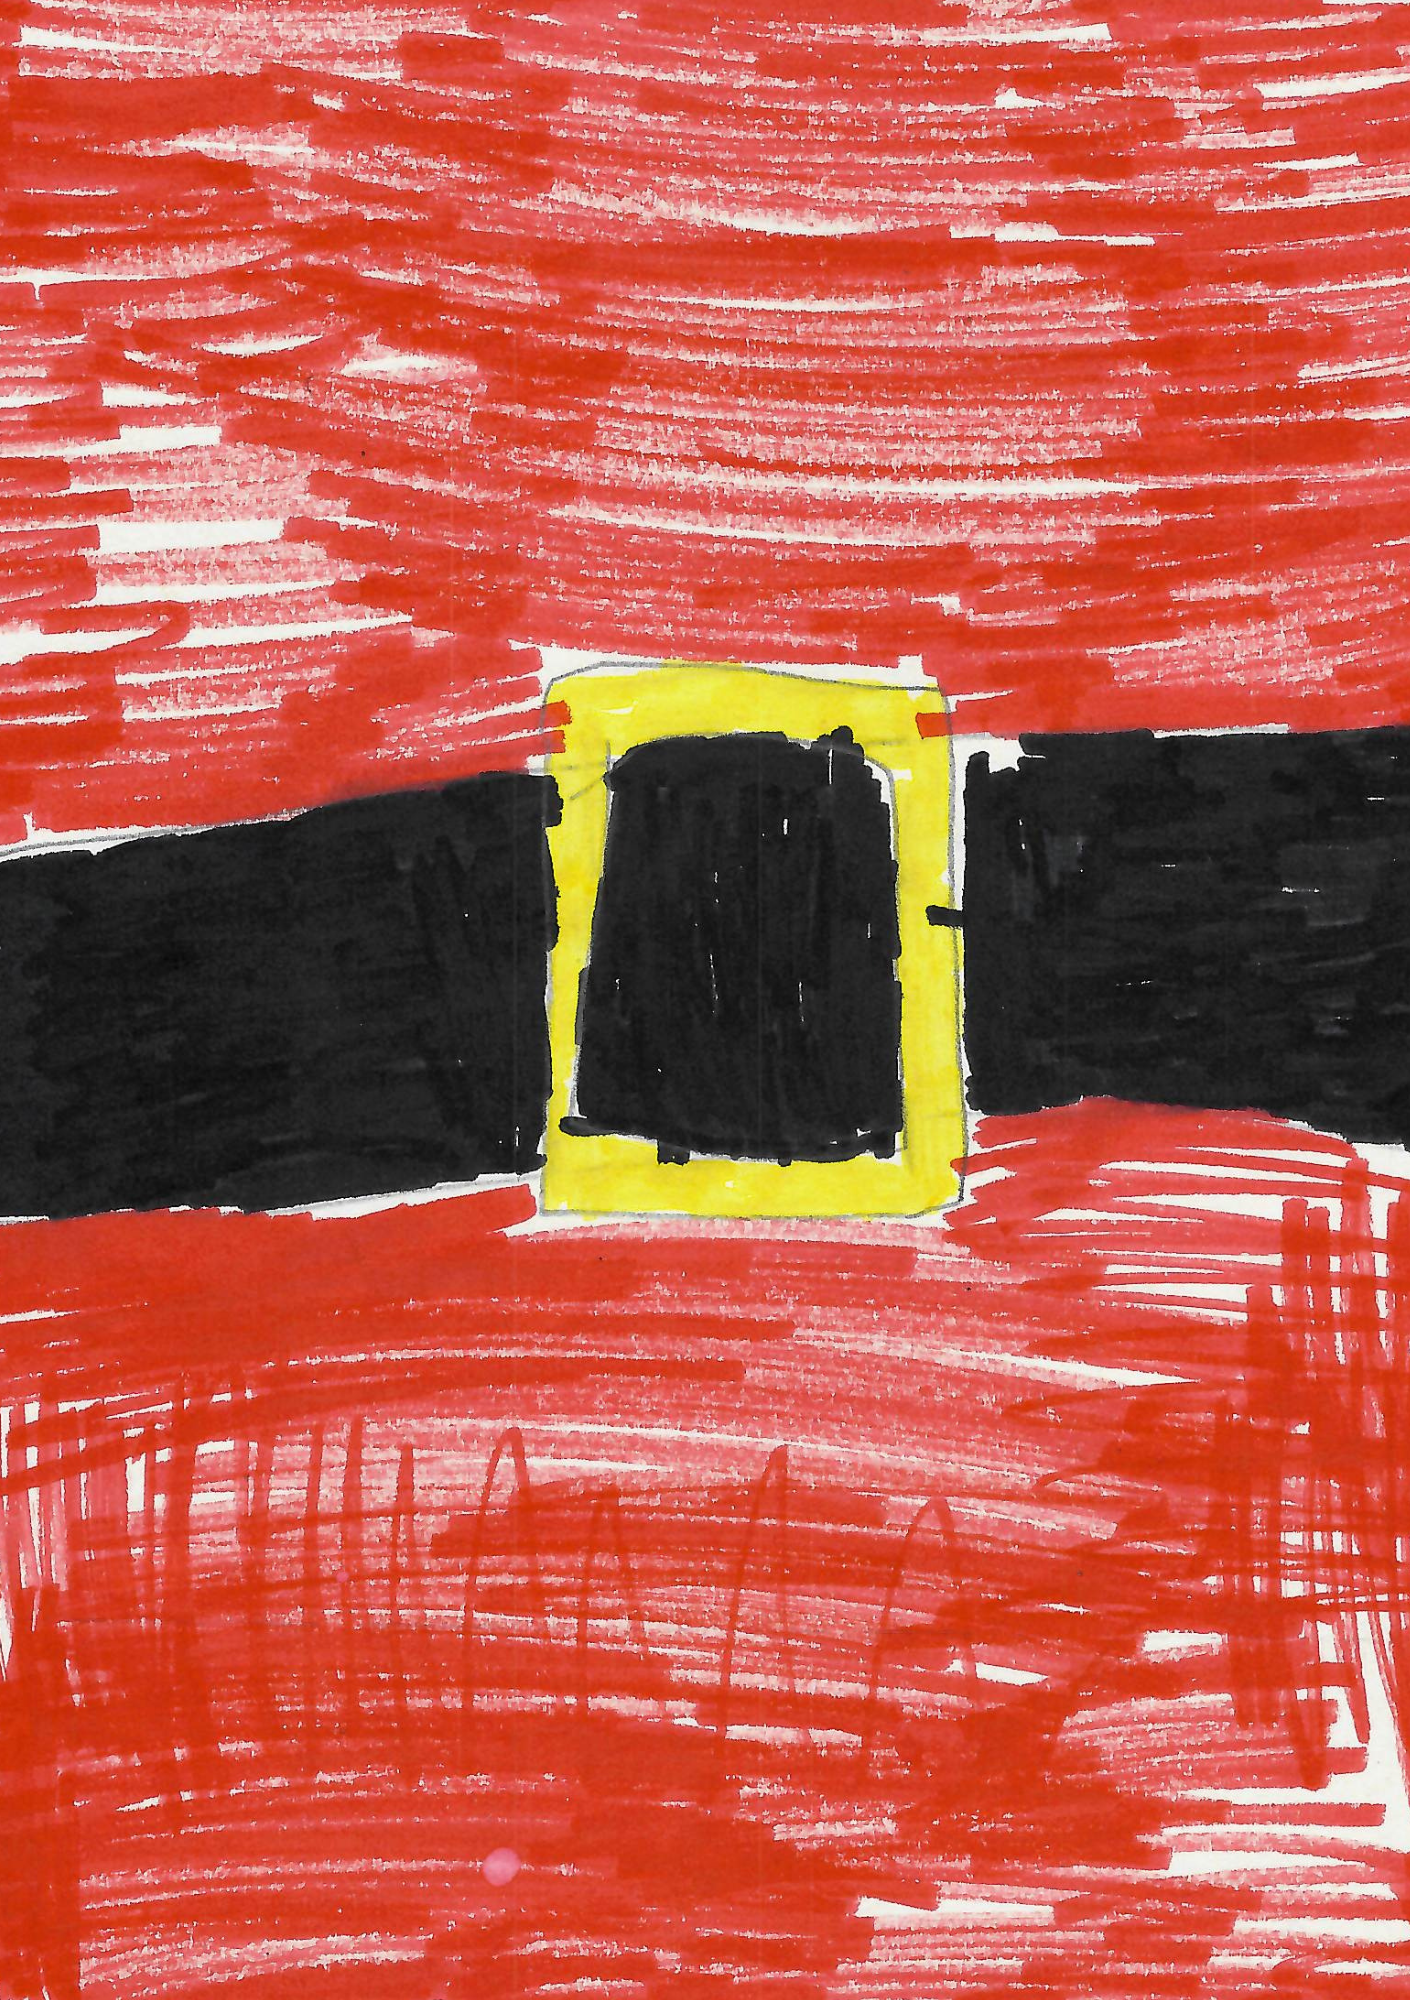  The image presents a playful and straightforward representation of Santa Claus's iconic red coat as perceived through a child's artwork. The drawing is dominated by a vibrant red background created with horizontal strokes, imitating the texture of fabric. Across the center of the composition is a broad black horizontal band, depicting Santa's belt. At the center of the belt is a bright yellow square with a smaller black square inside it, representing the buckle. The drawing captures the essence of Santa's traditional outfit with its bold, simple shapes and festive colors, evoking the cheerful spirit of the holiday season.